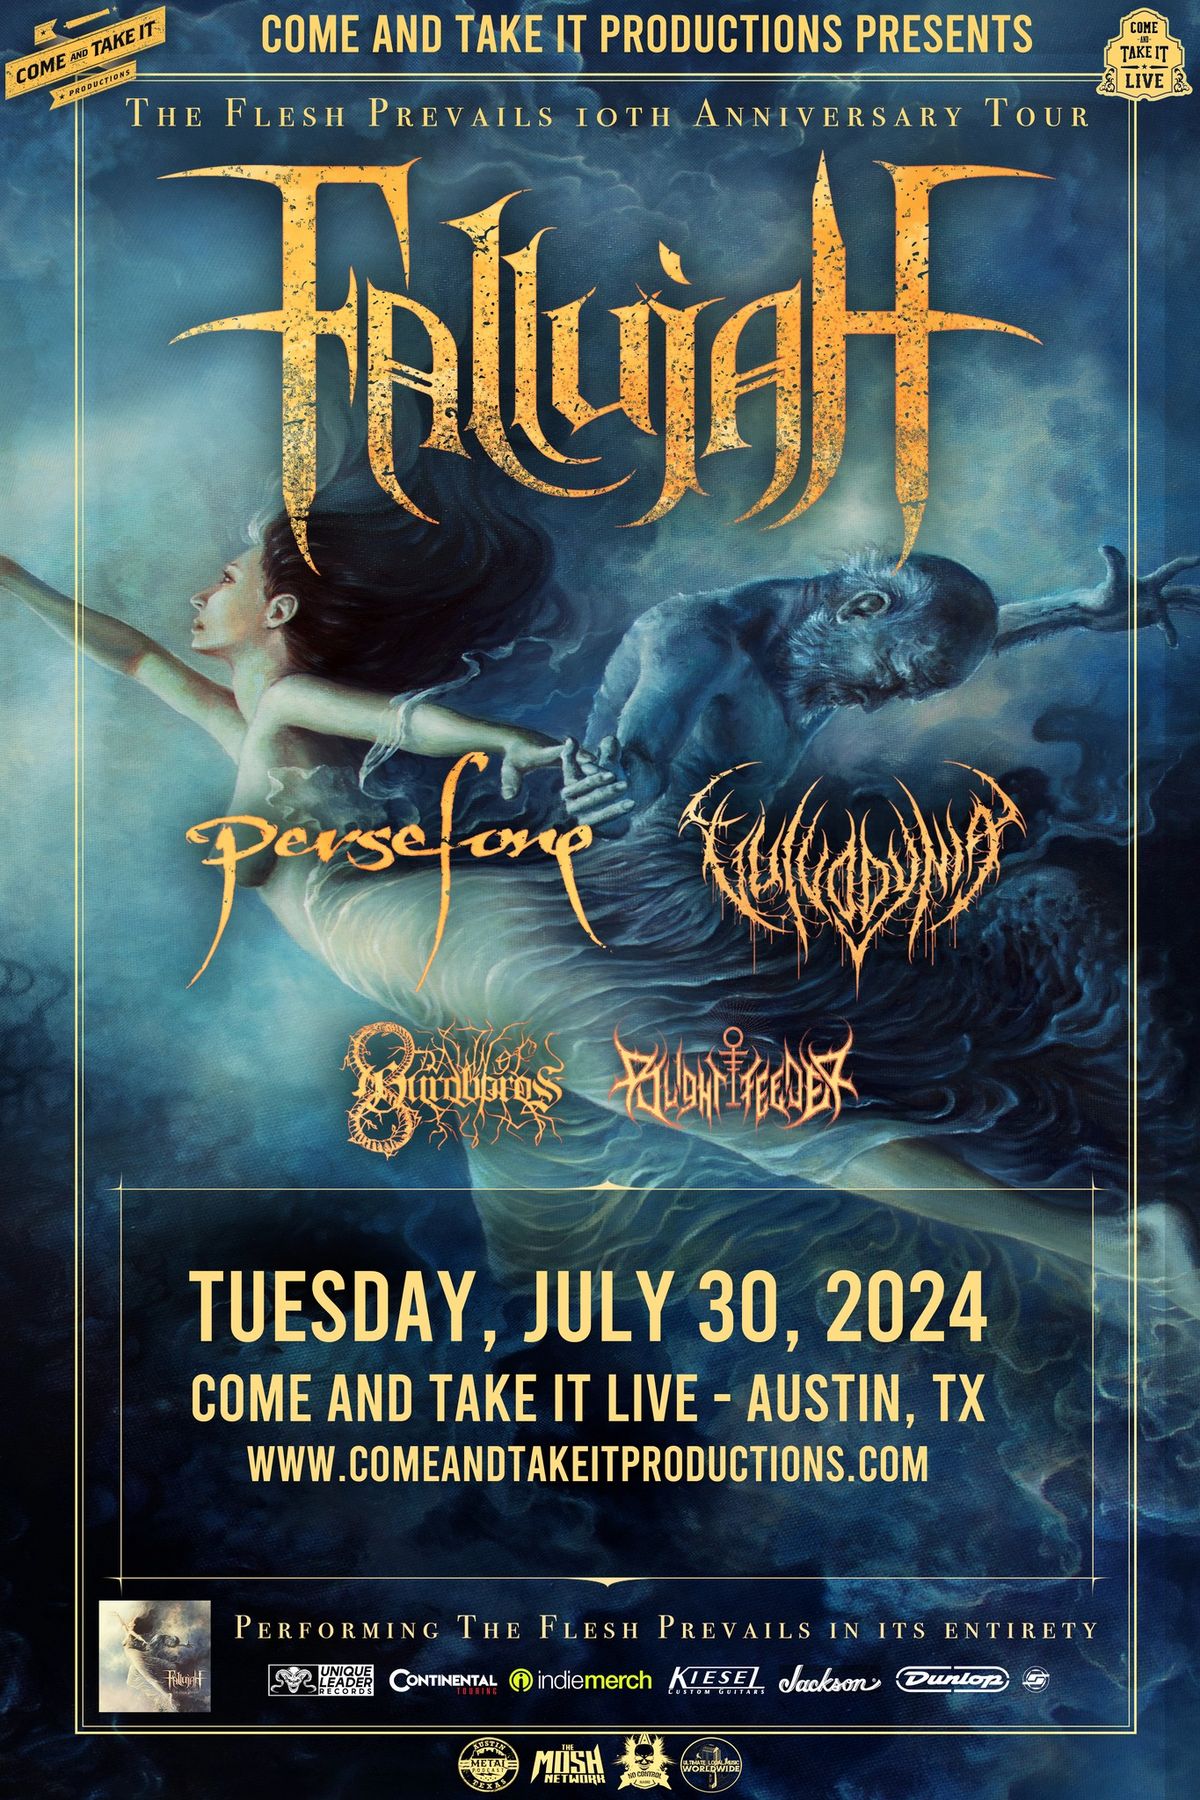 FALLUJAH: The Flesh Prevails 10th Anniversary Tour at Come and Take It Live!